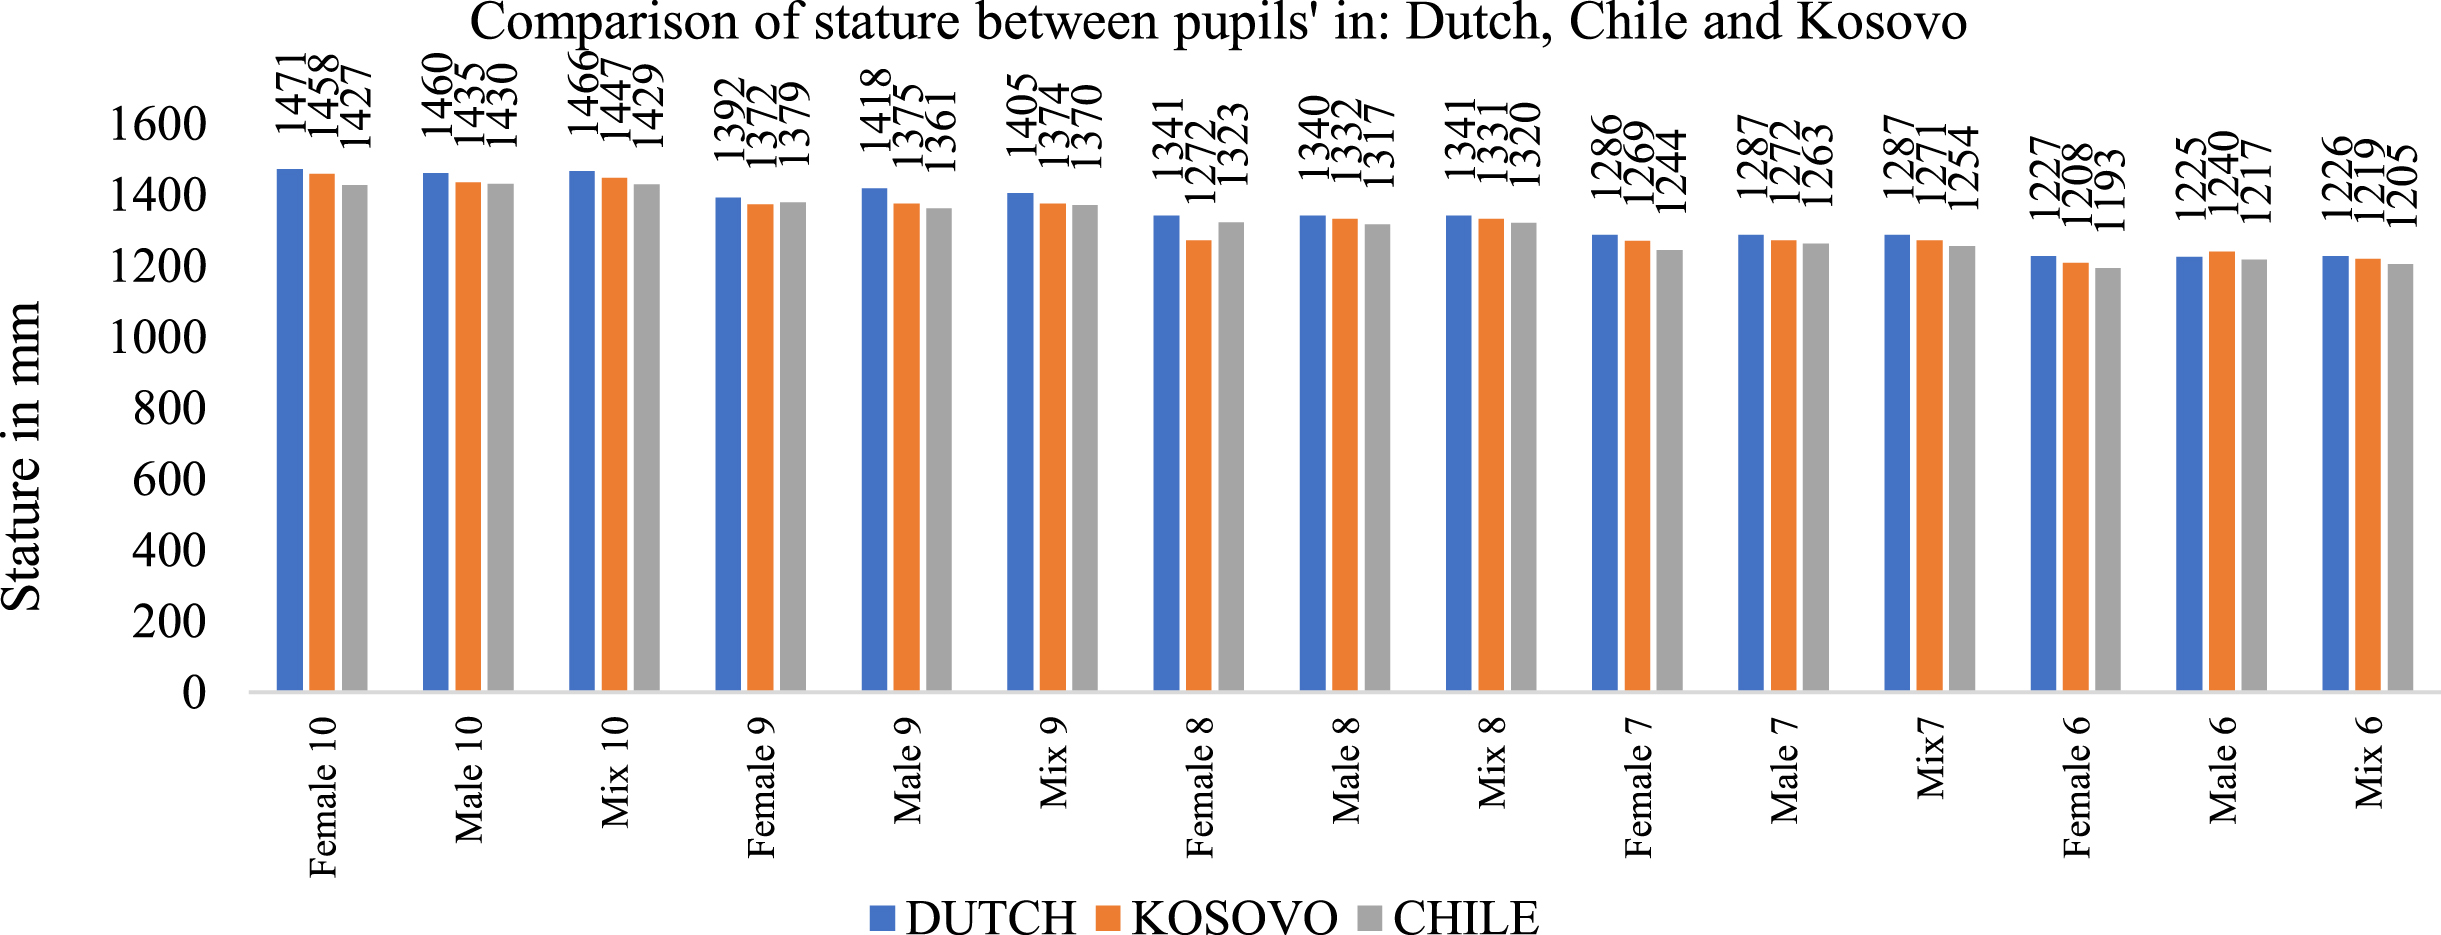 Comparison of stature according to data for countries: Kosovo, The Netherlands, Chile.